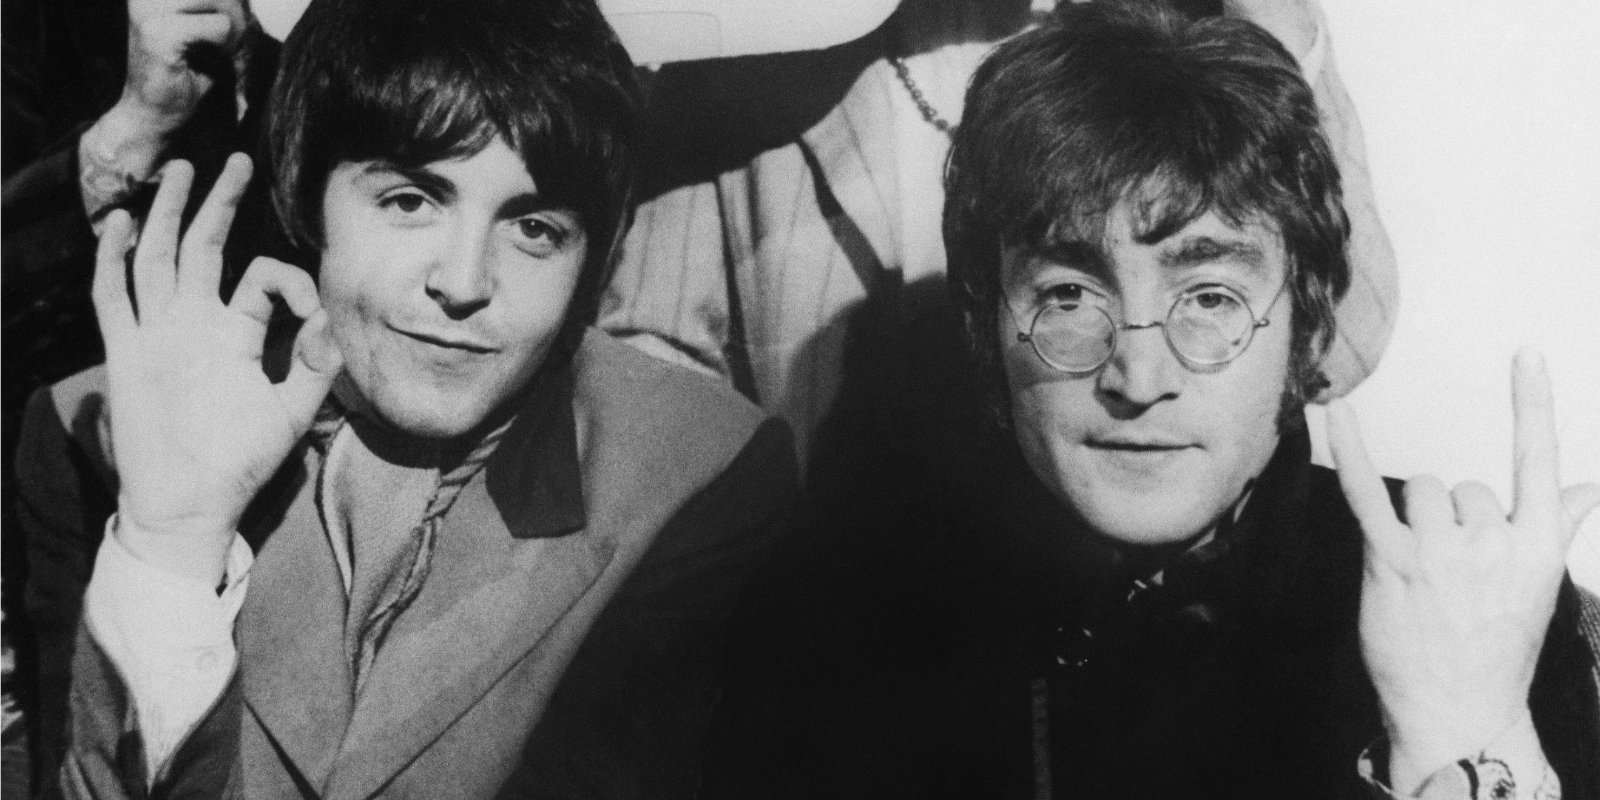 Paul McCartney and John Lennon pose together in a photograph taken in the mid-1960s.